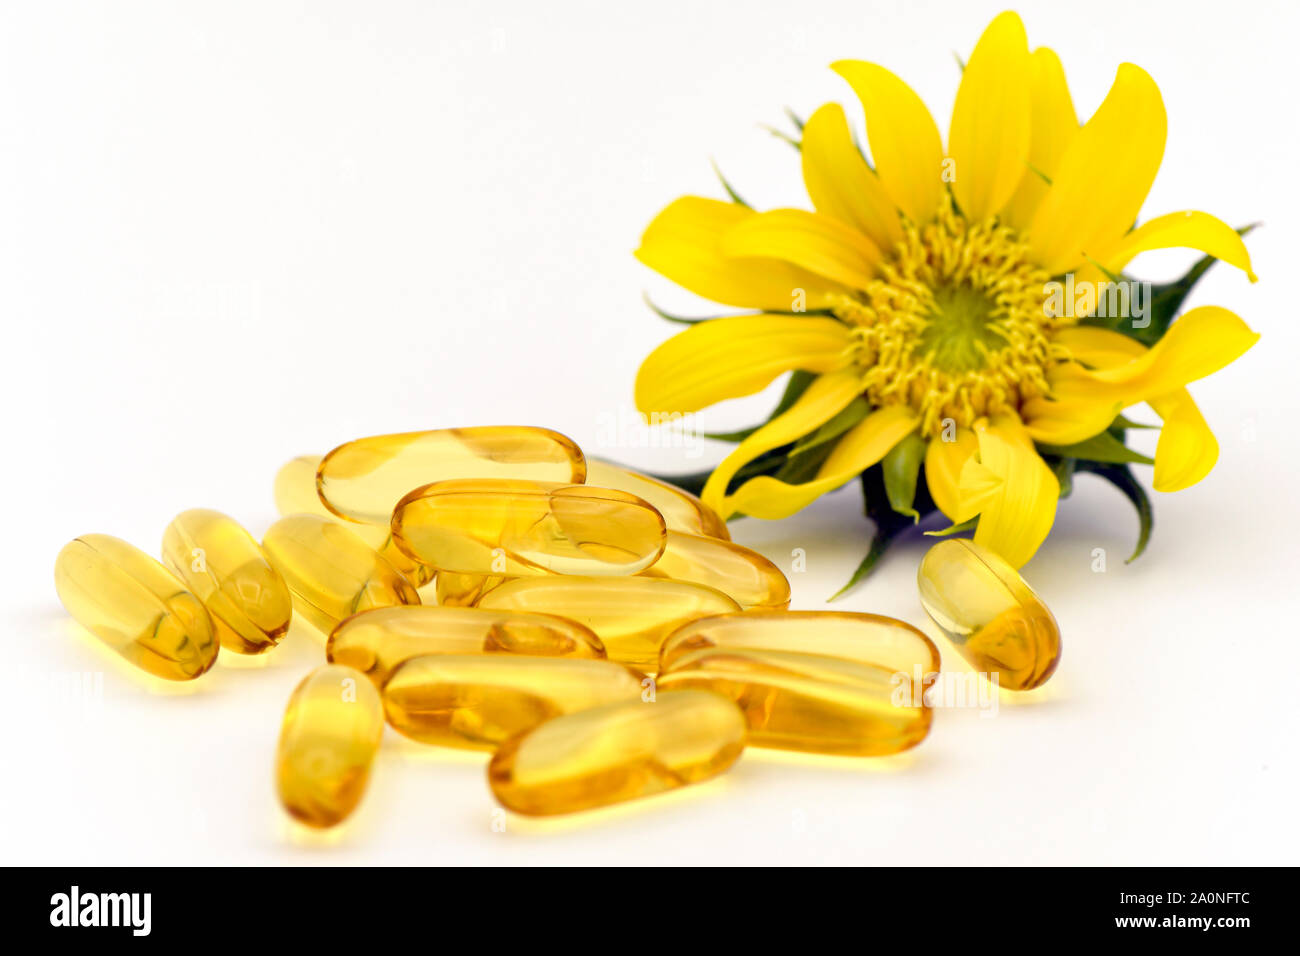 Dietary supplement capsule from natural ingredients. Essential oil from organic and natural source. Stock Photo